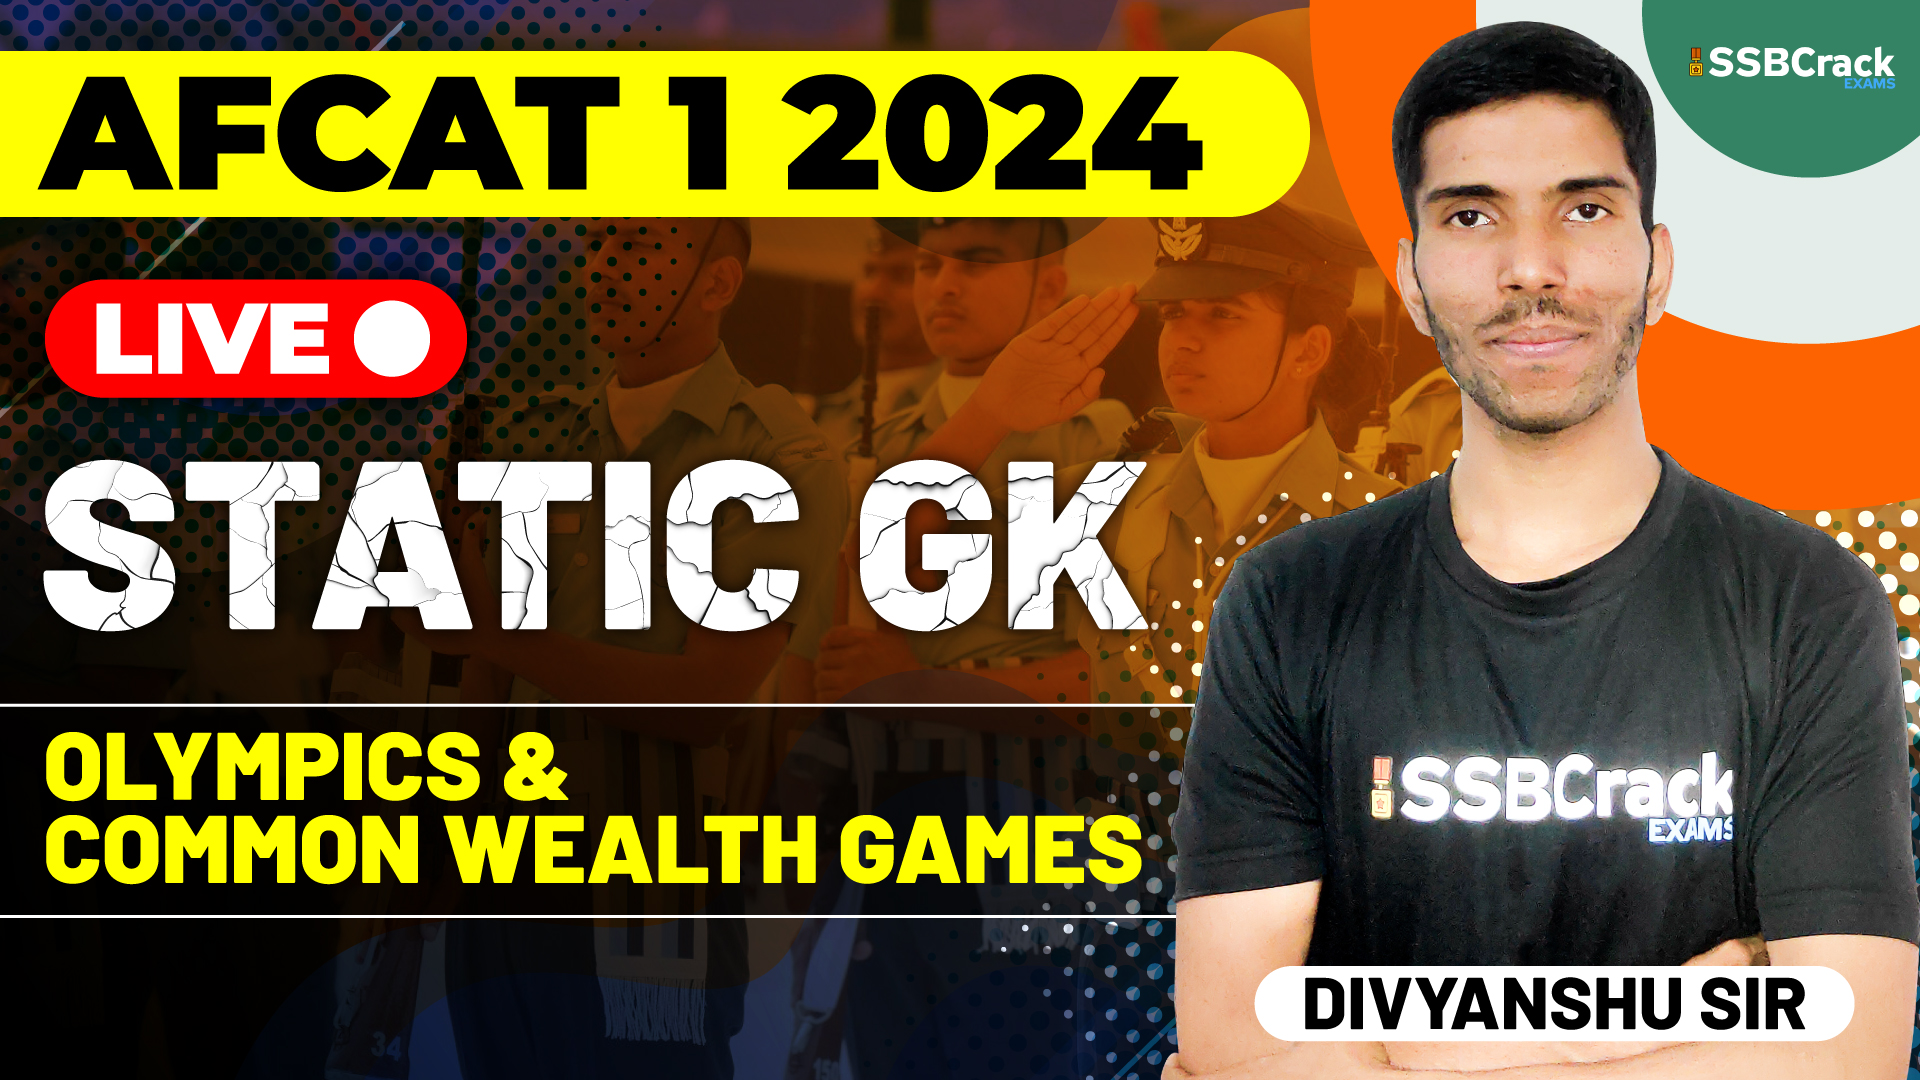 AFCAT 1 2024 Static GK Olympics Common Wealth Games